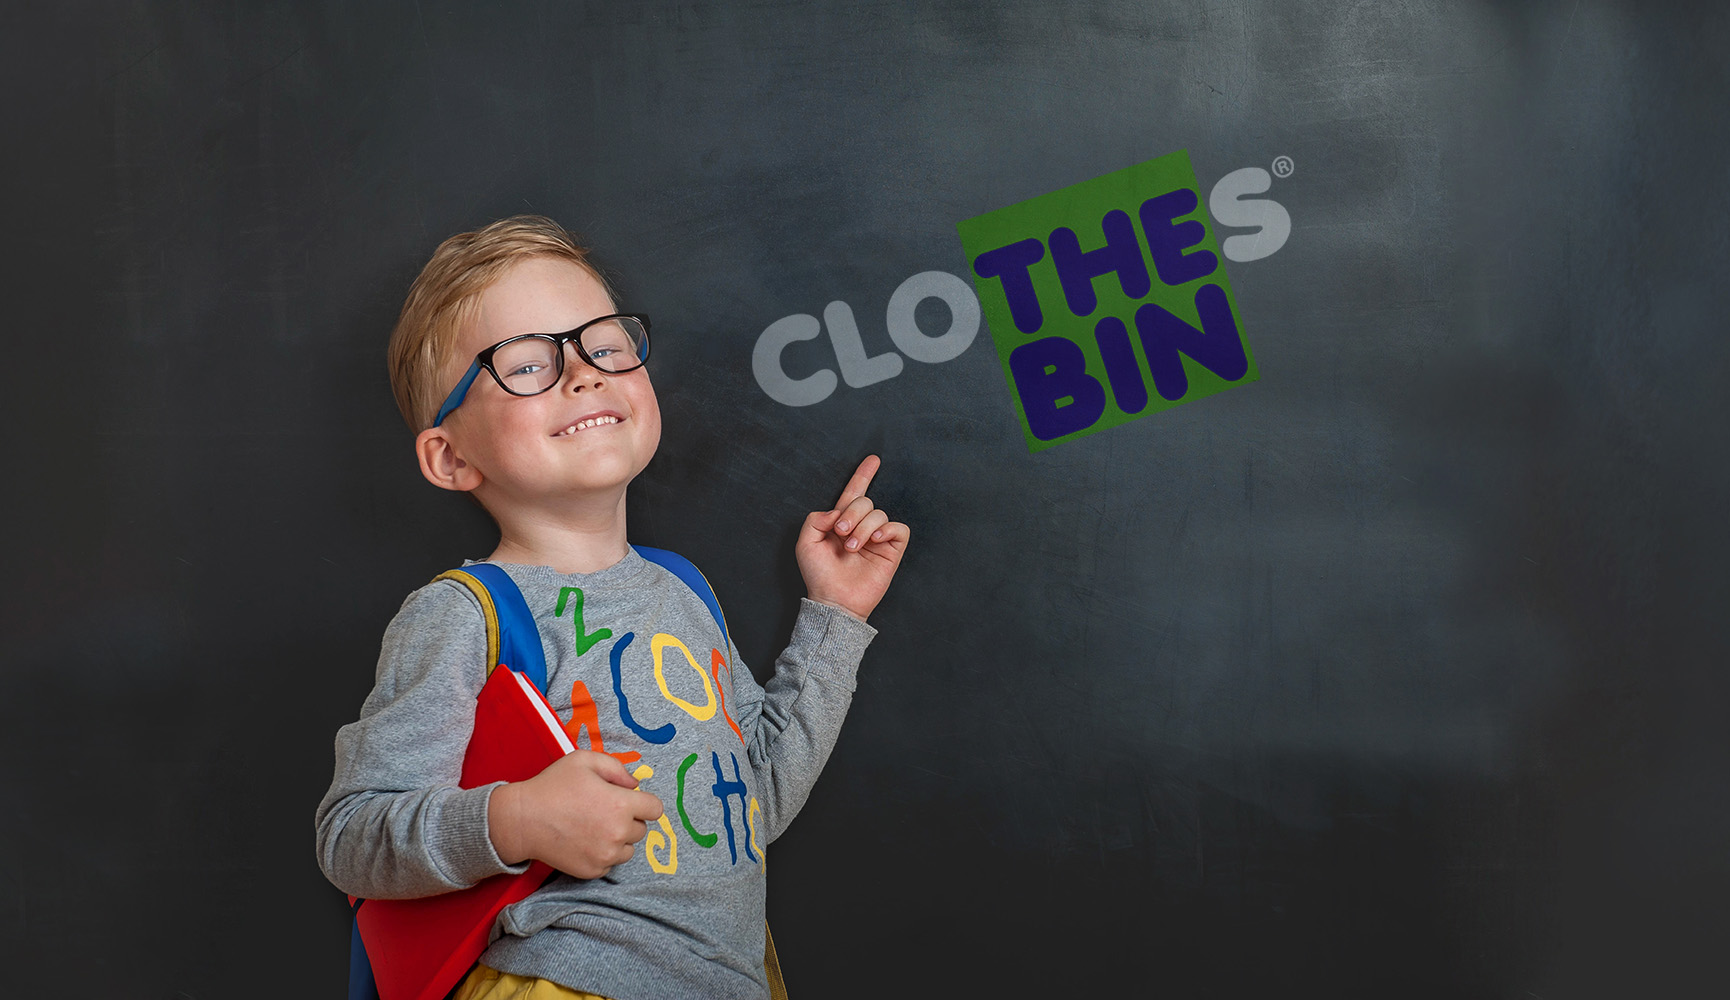 Student pointing at Clothes Bin logo on a chalkboard